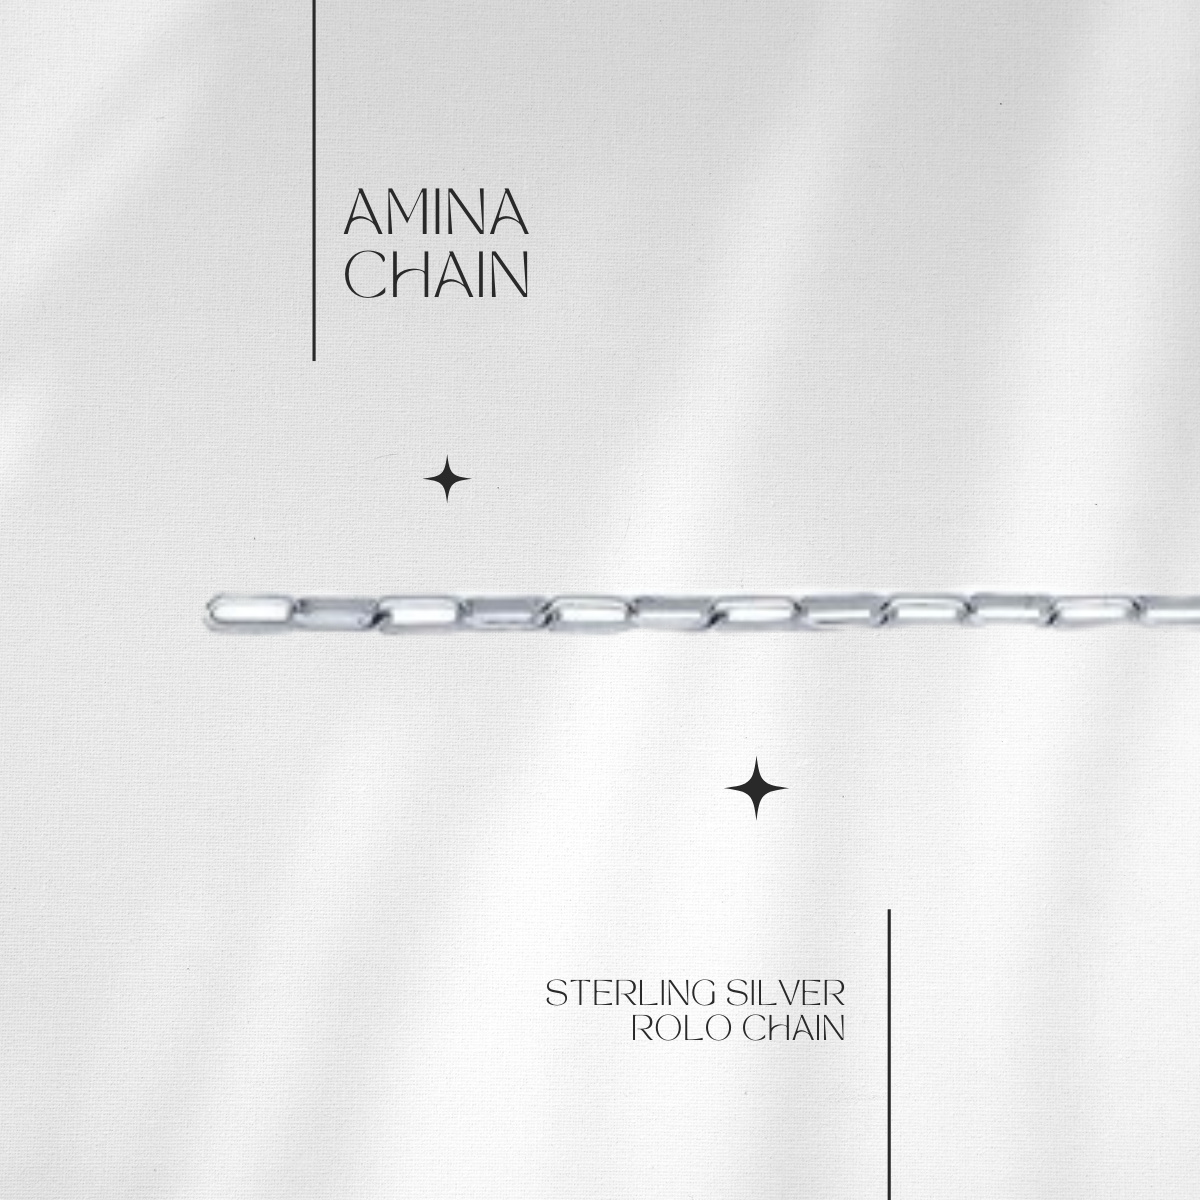 Amina Rolo Chain in Sterling // RESERVATION  for IN-PERSON Permanent Jewelry